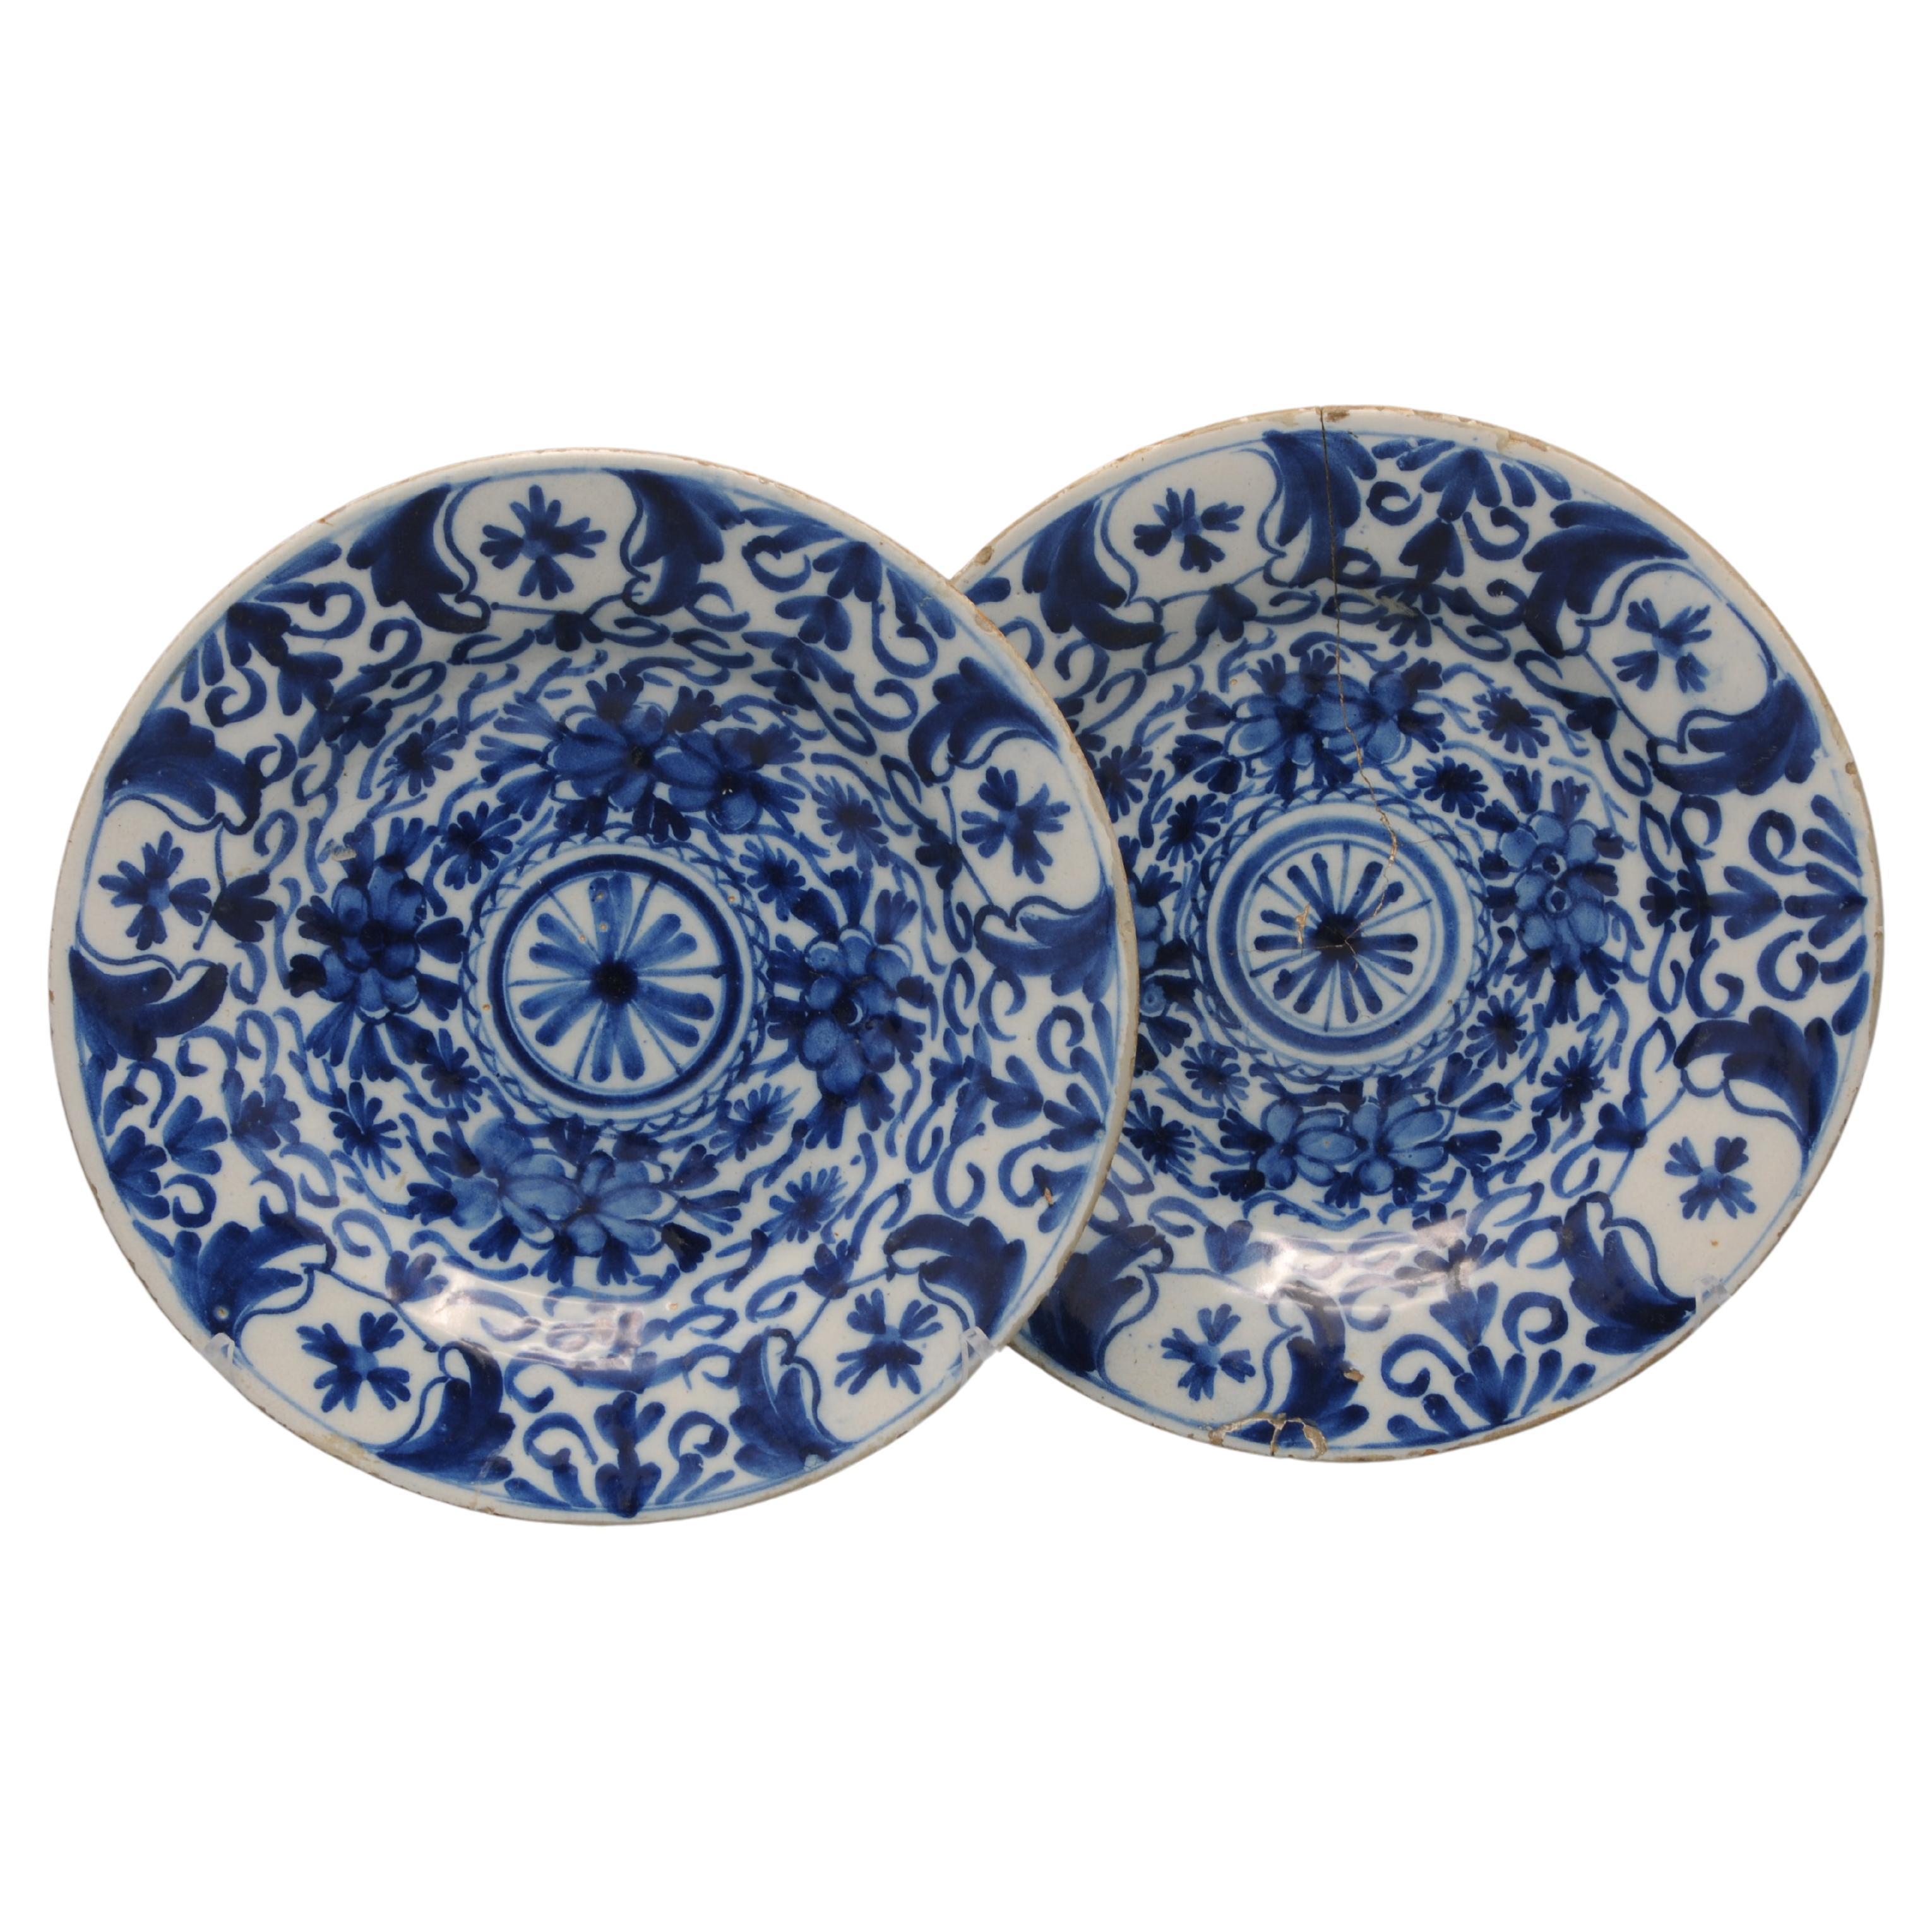 Delft - Pair of plates - Late 18th century 